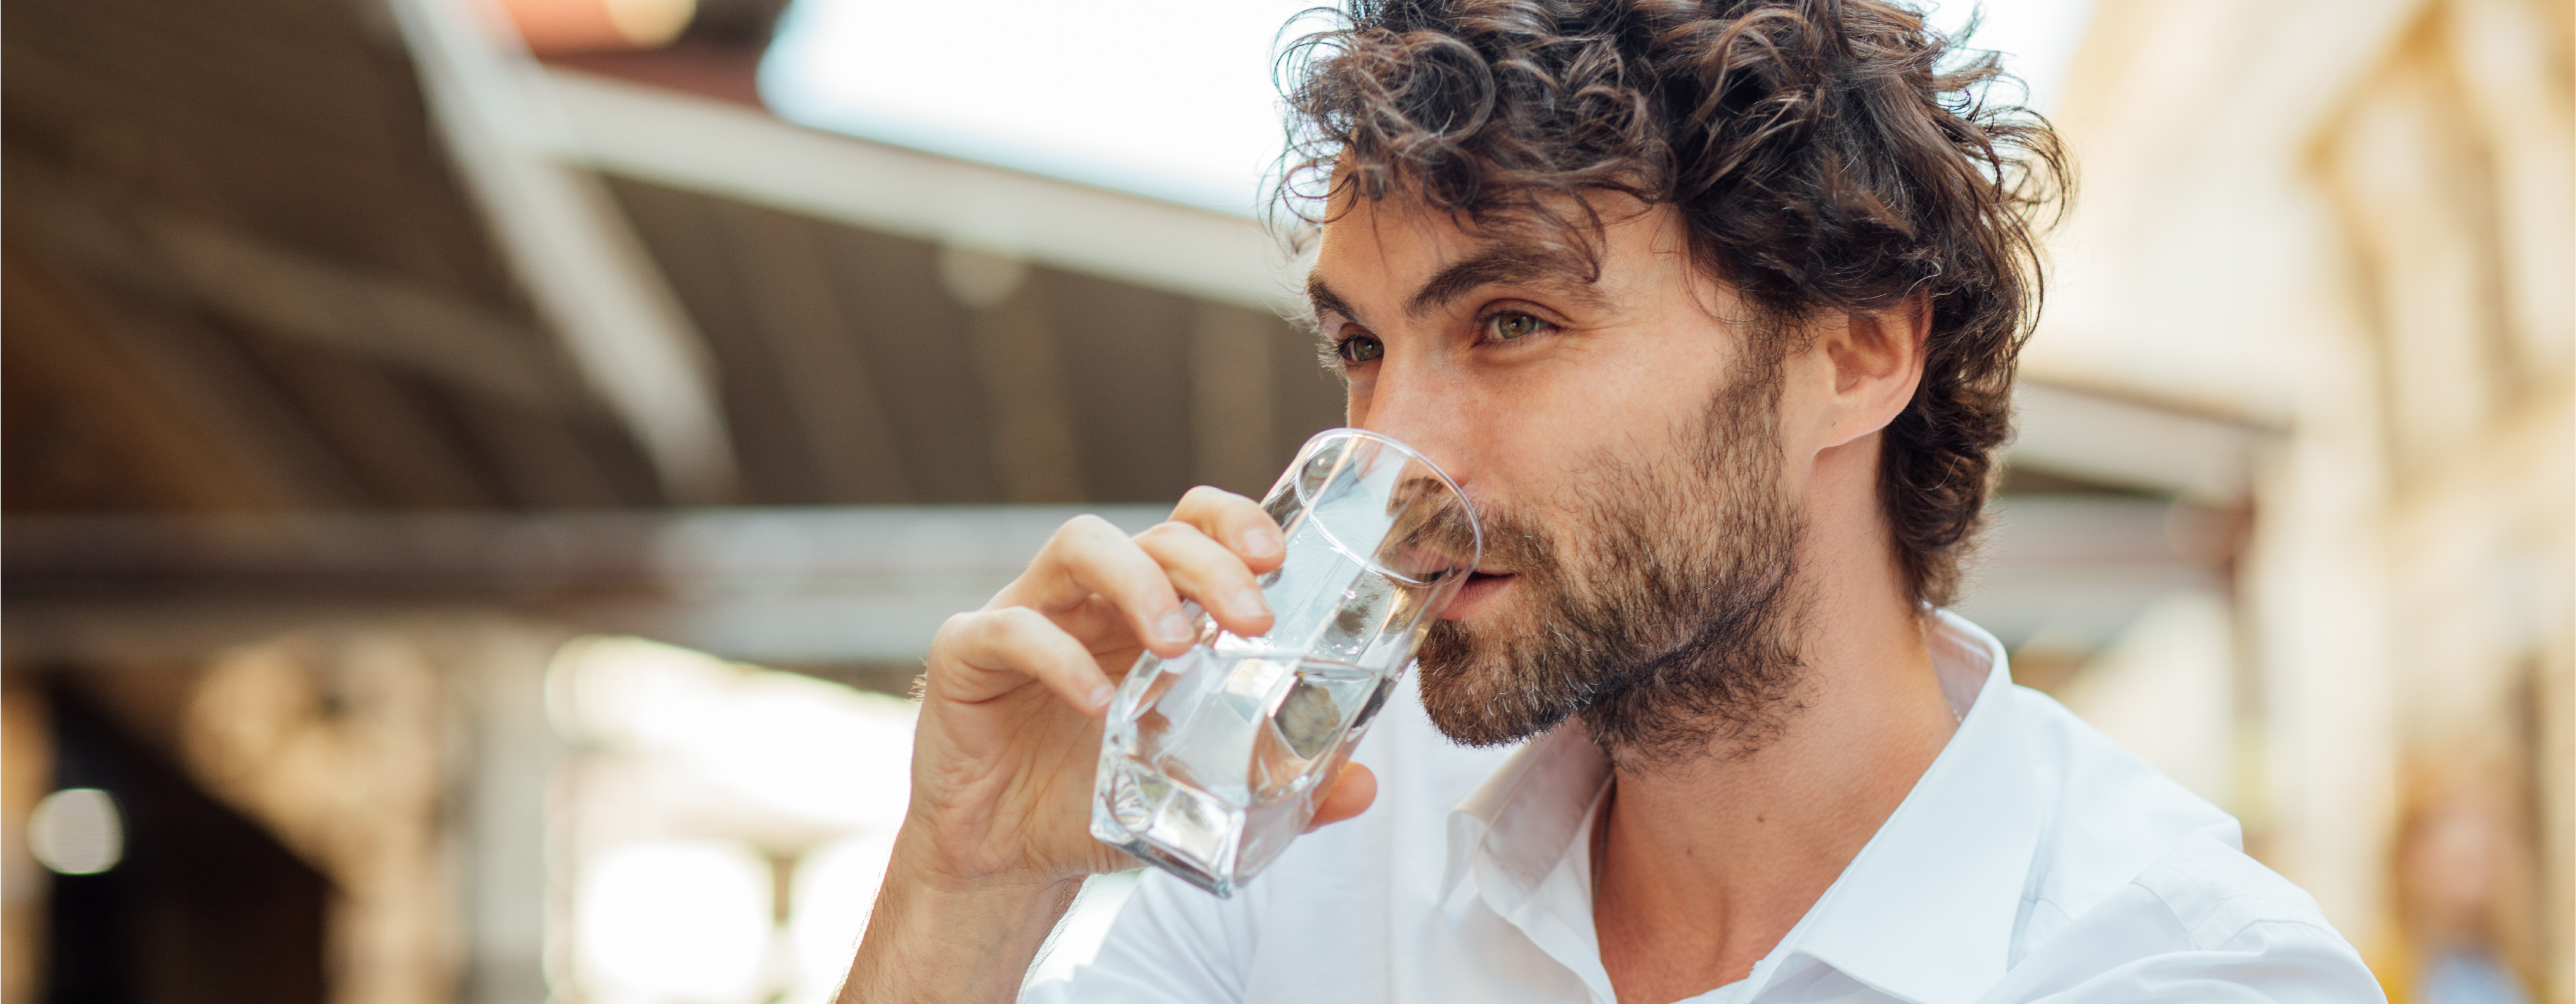 Man Drinking Water for Hydration for Health